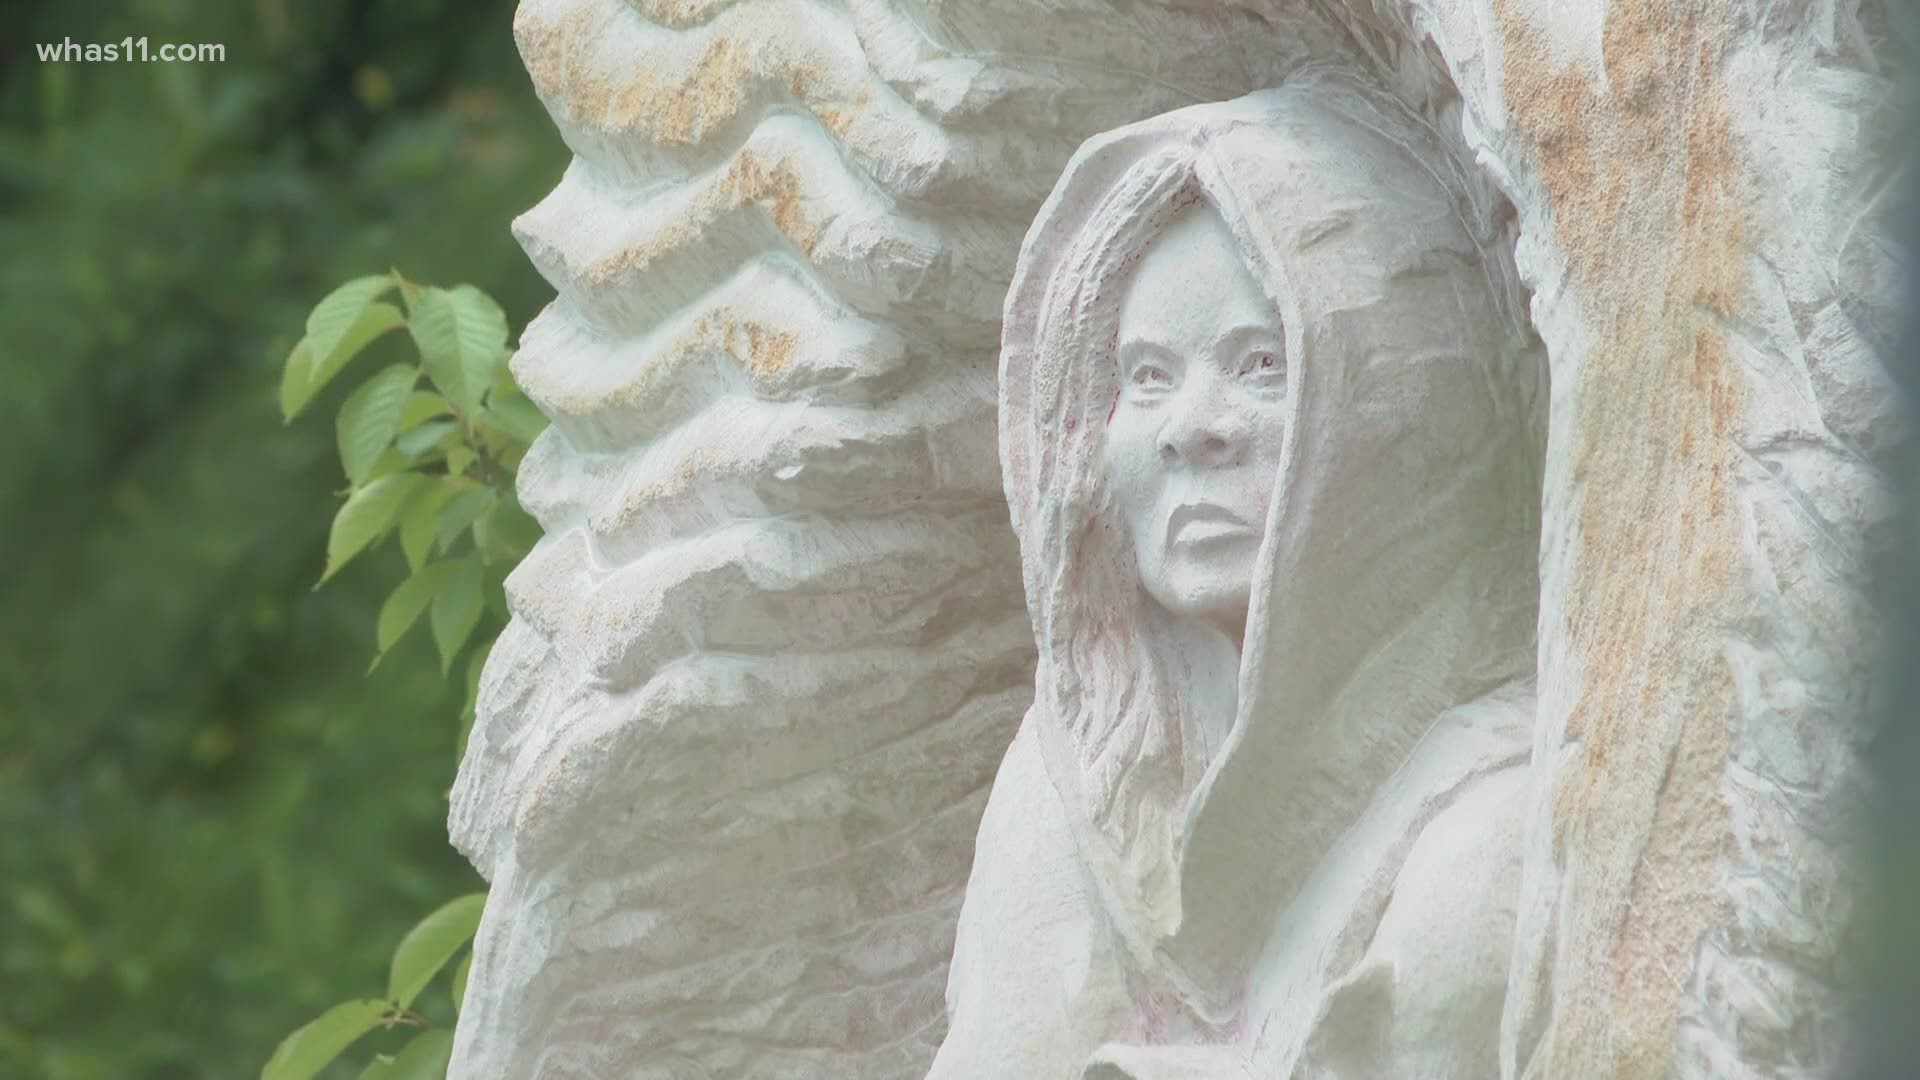 A nonprofit in Indiana is working to raise funds for a security system at the Underground Railroad Gardens after a sculpture there was vandalized.